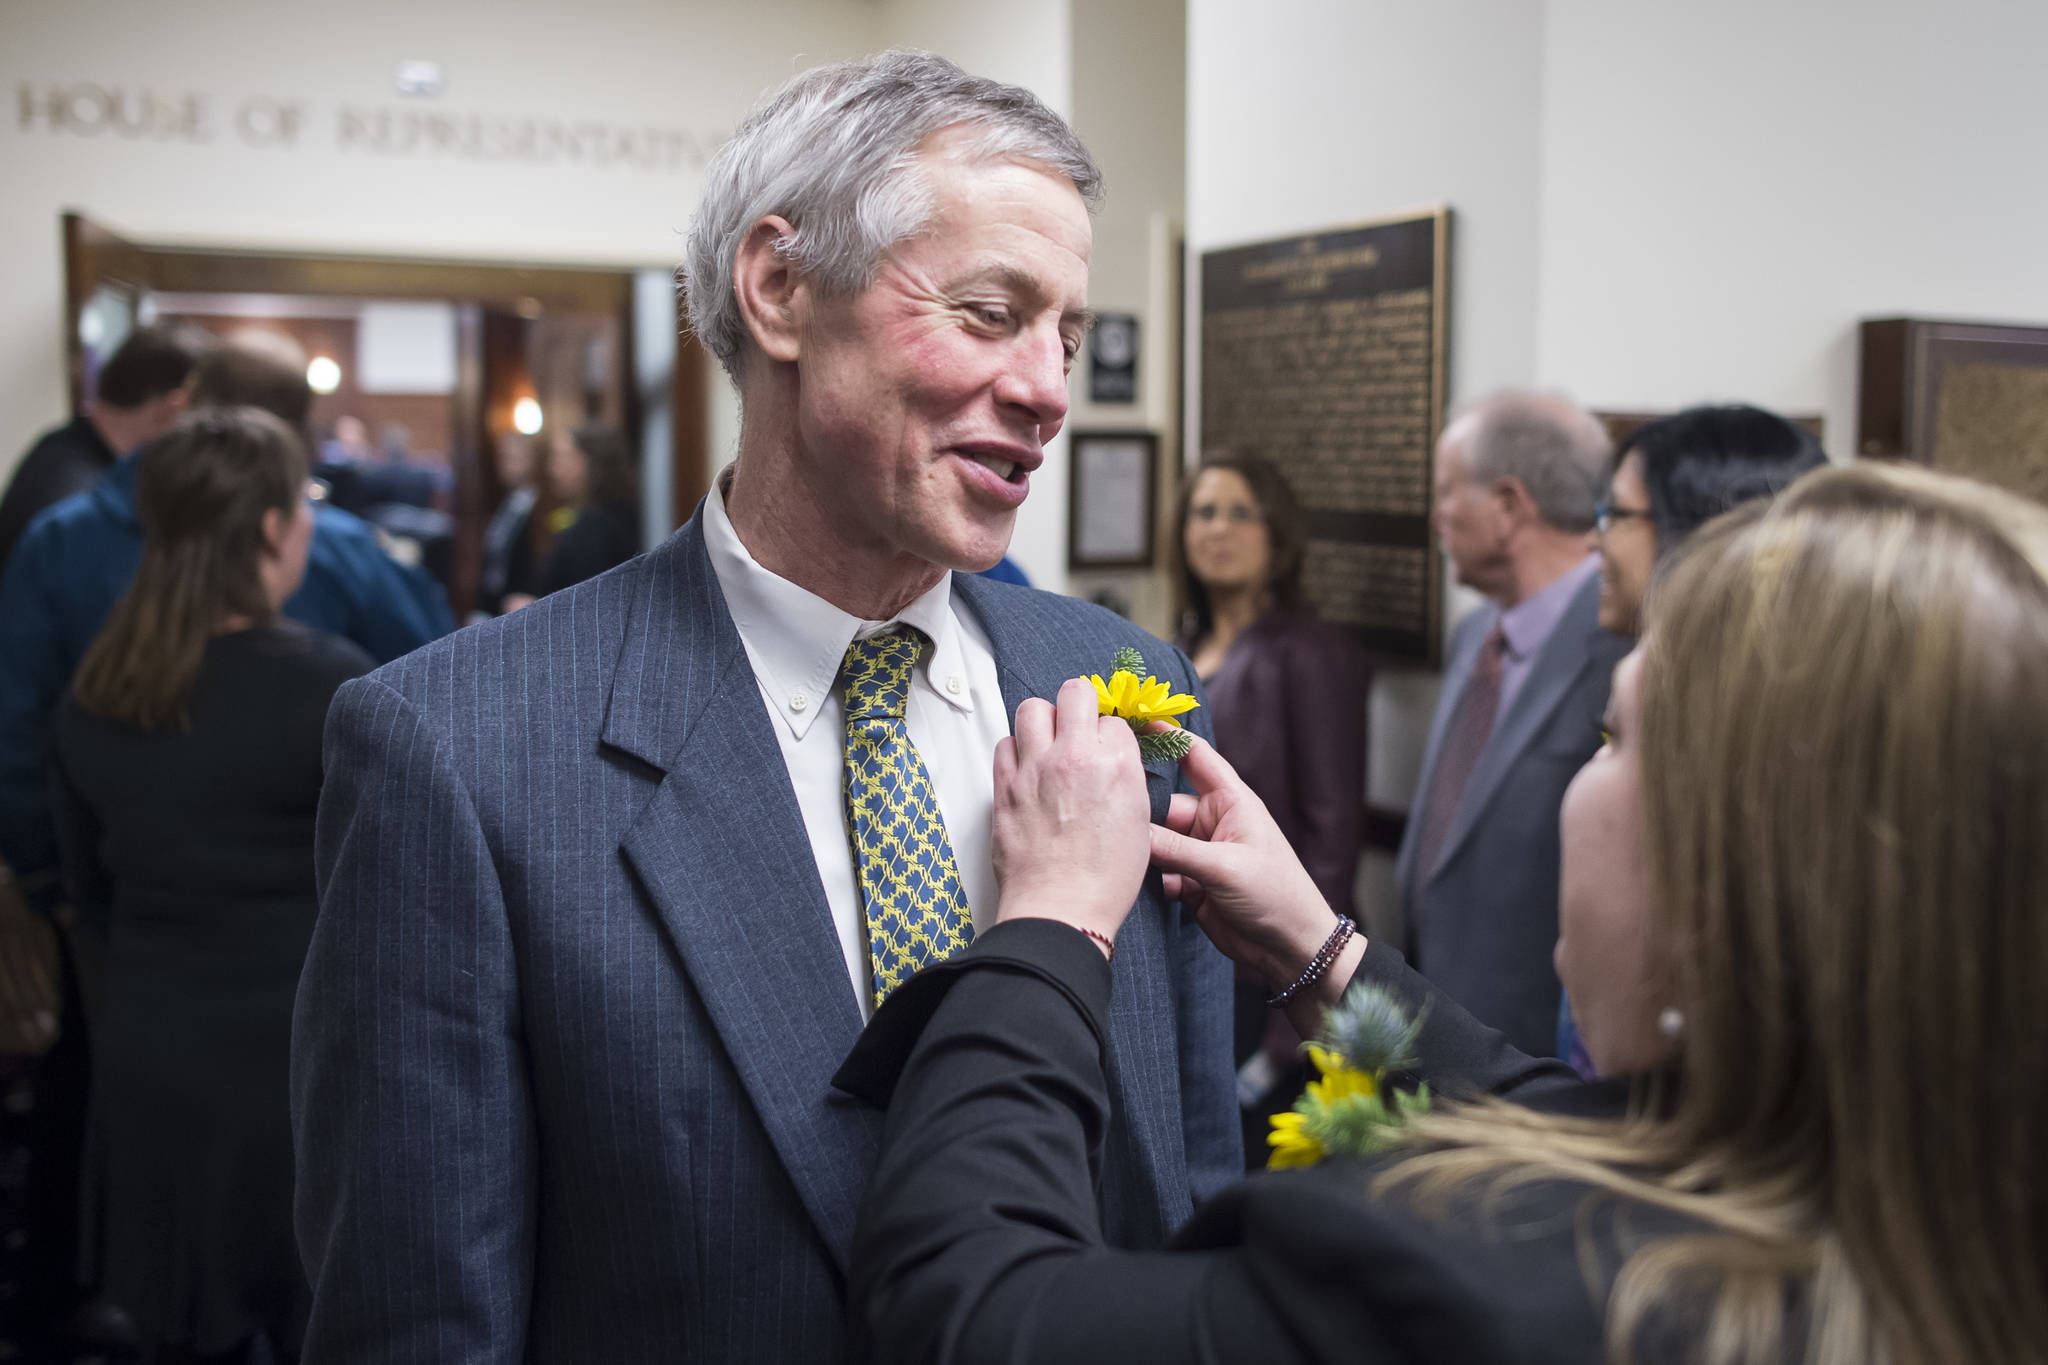 Rep. Geran Tarr, D-Anchorage, right, pins a flower for Rep. Matt Claman, D-Anchorage, on the opening day of the 31st Session of the Alaska Legislature on Tuesday, Jan. 15, 2019. (Michael Penn | Juneau Empire)